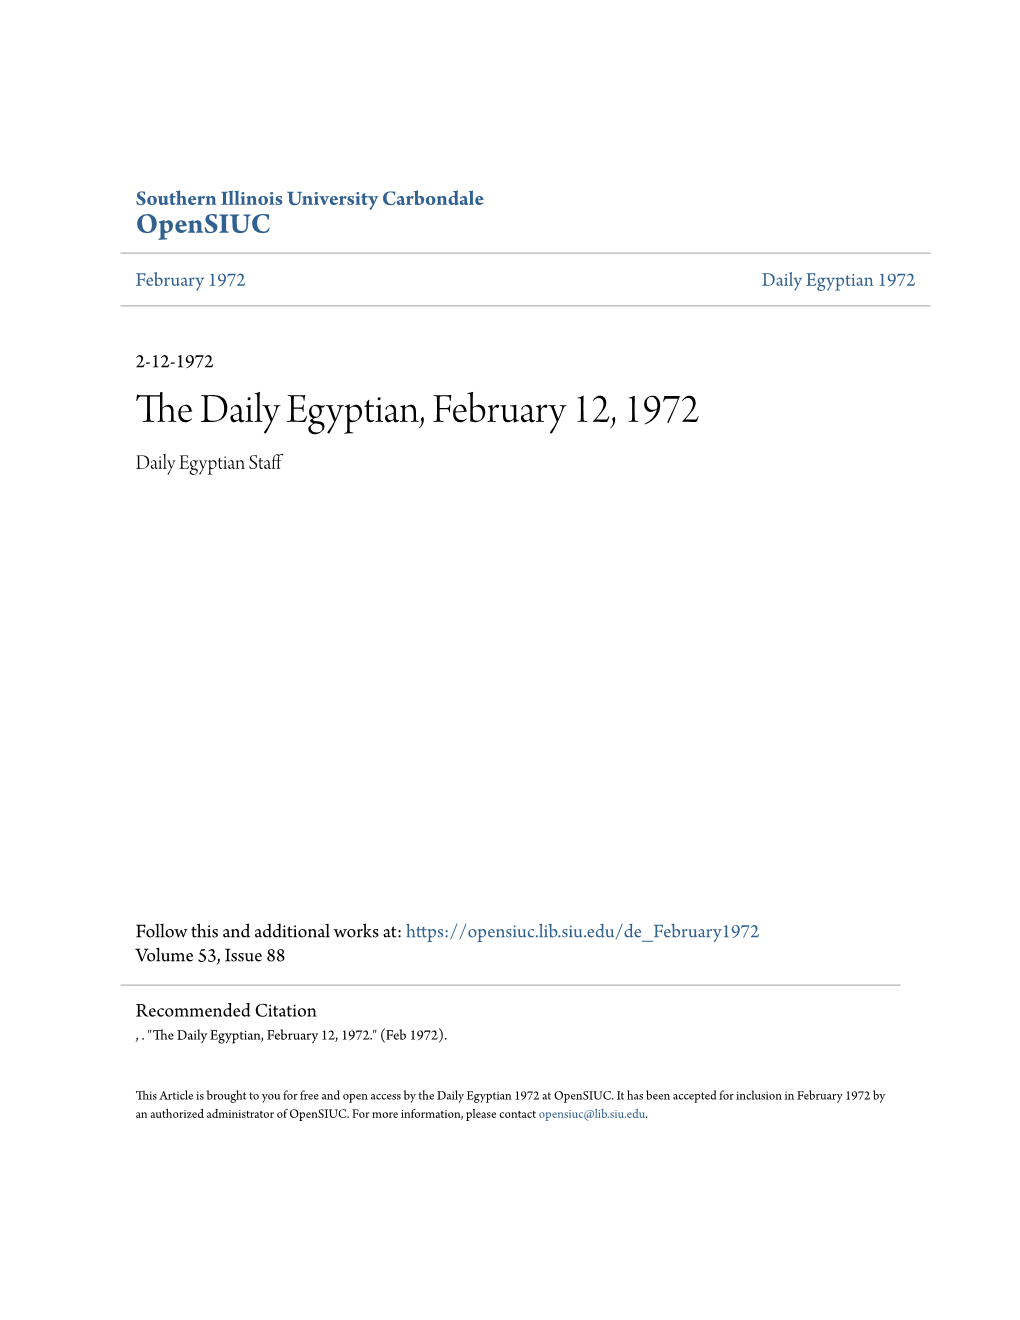 The Daily Egyptian, February 12, 1972